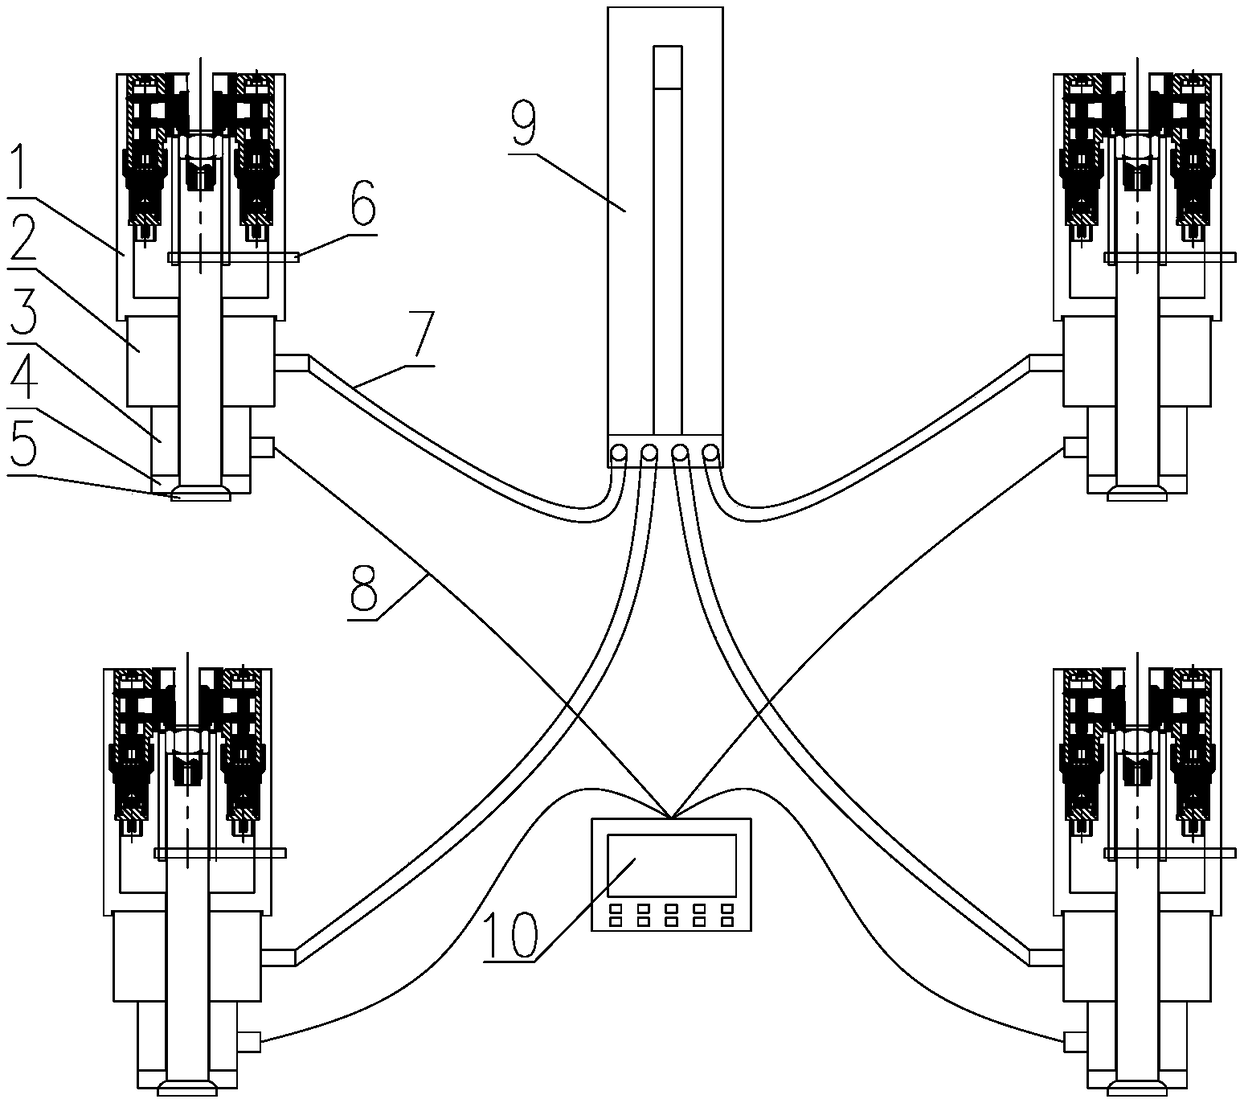 Four point synchronous hydraulic loading device for spacecraft docking